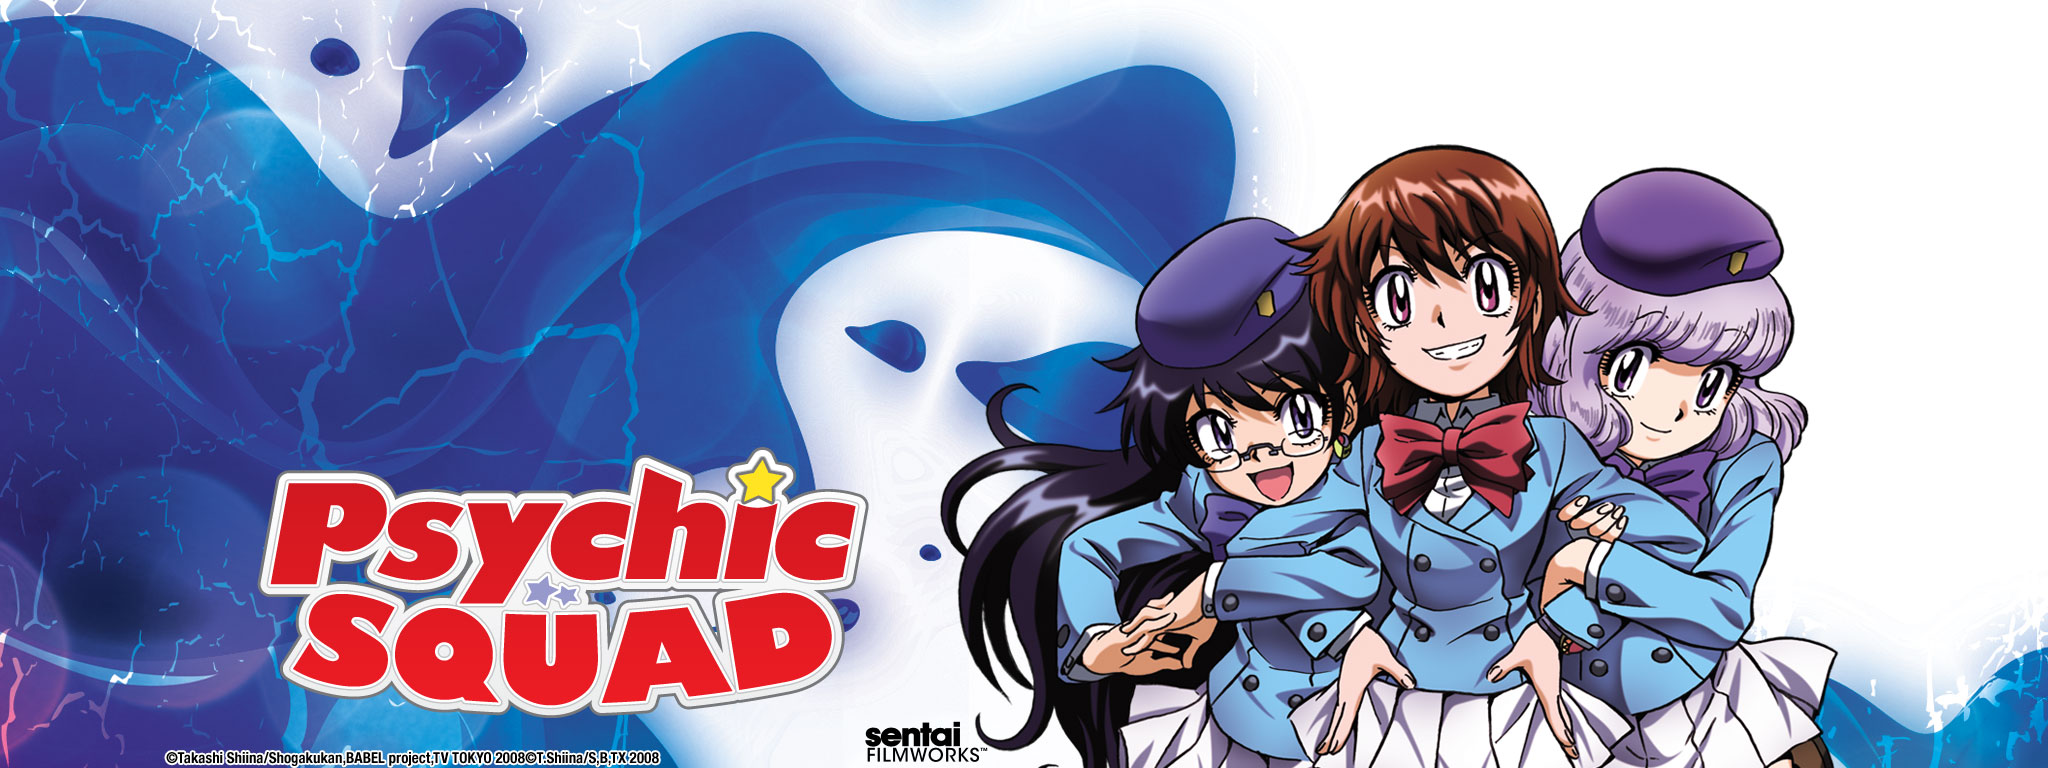 Title Art for Psychic Squad